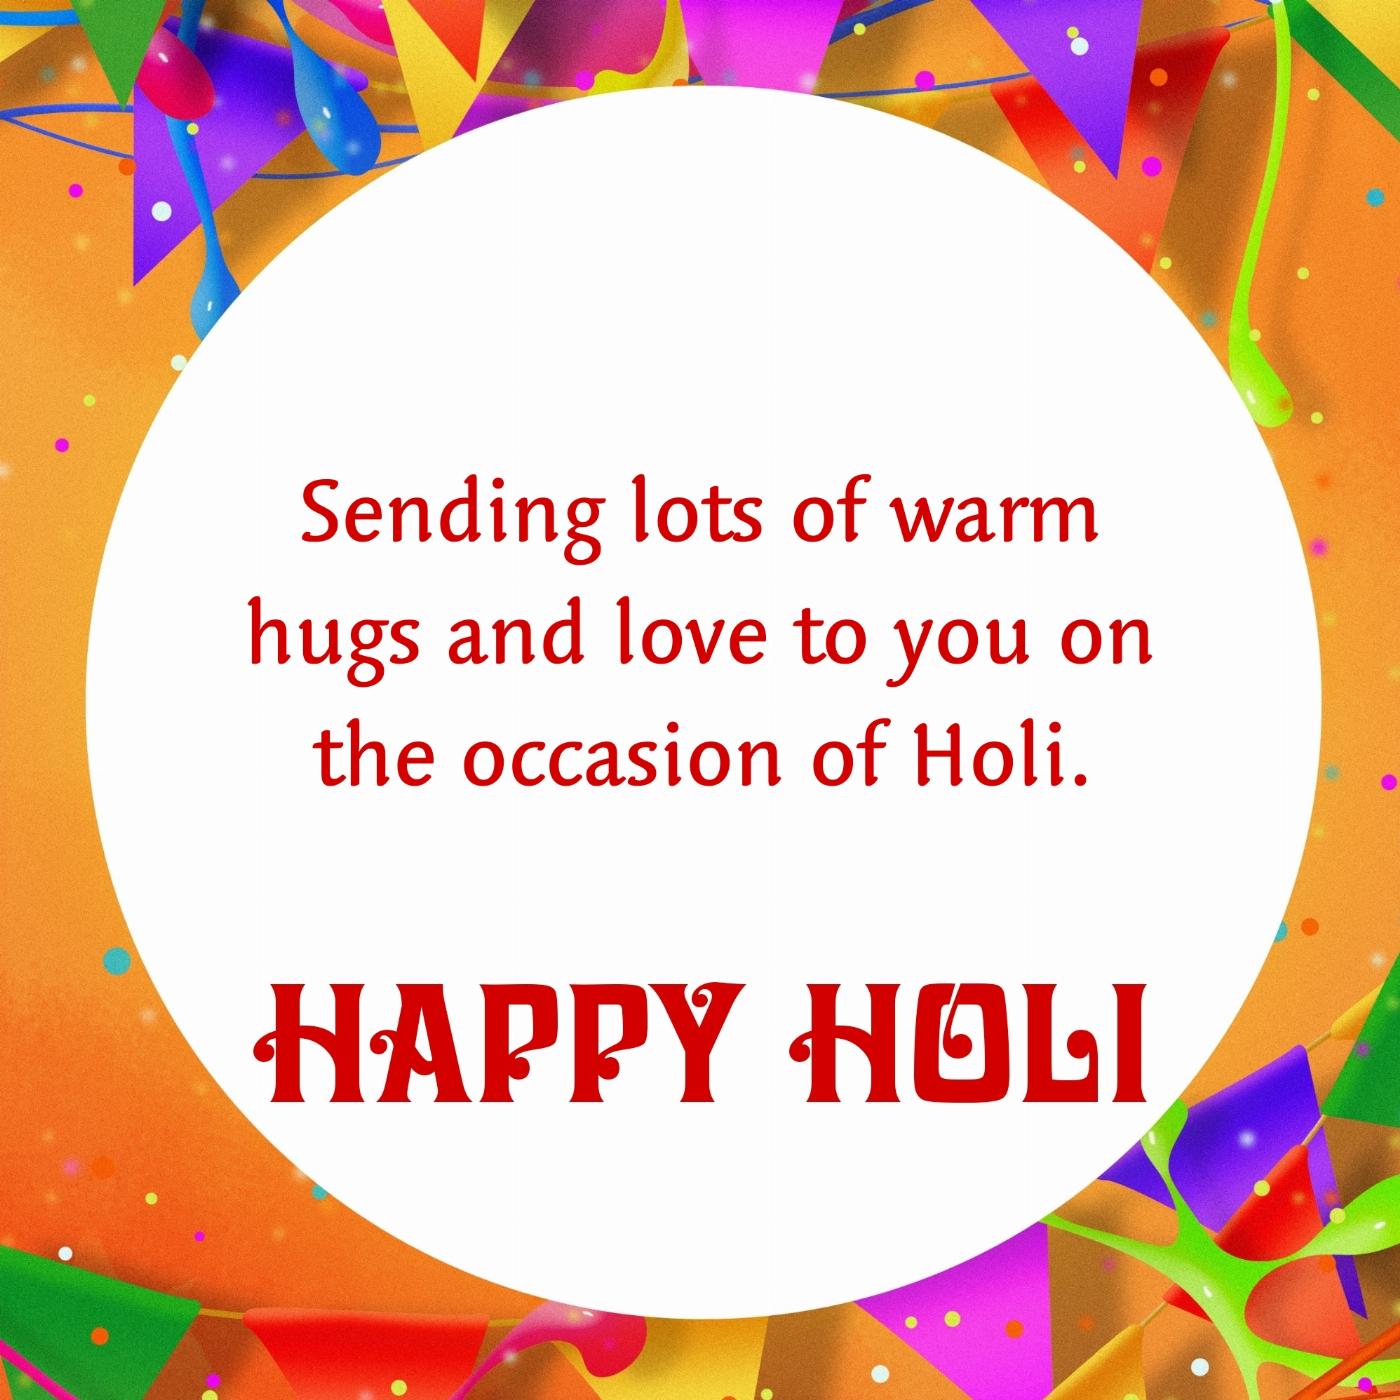 Sending lots of warm hugs and love to you on the occasion of Holi